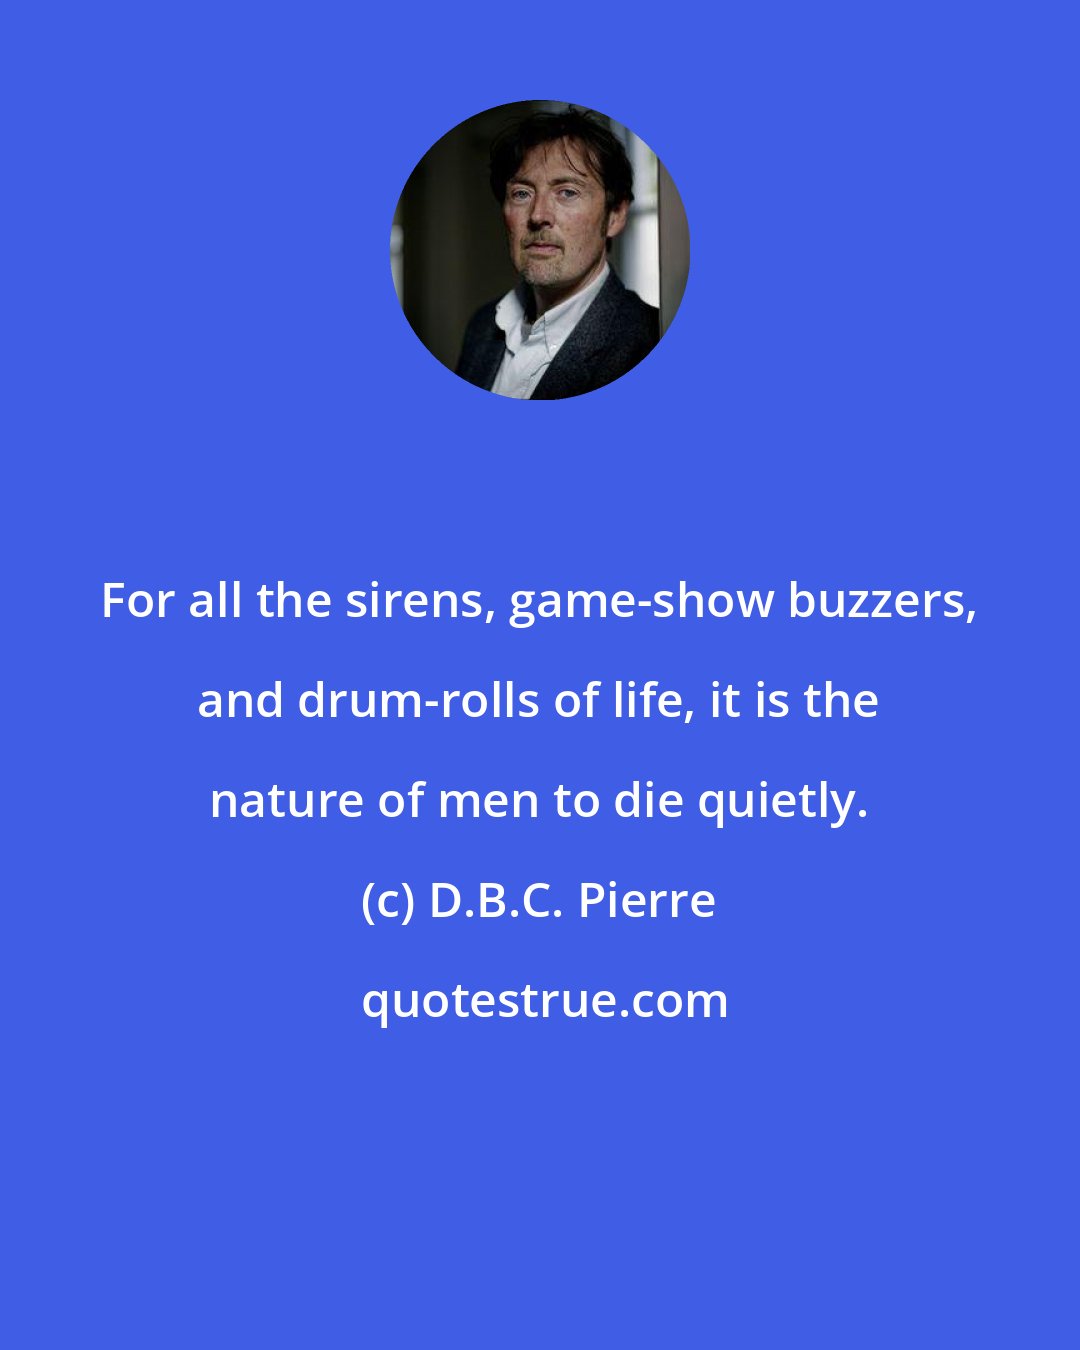 D.B.C. Pierre: For all the sirens, game-show buzzers, and drum-rolls of life, it is the nature of men to die quietly.